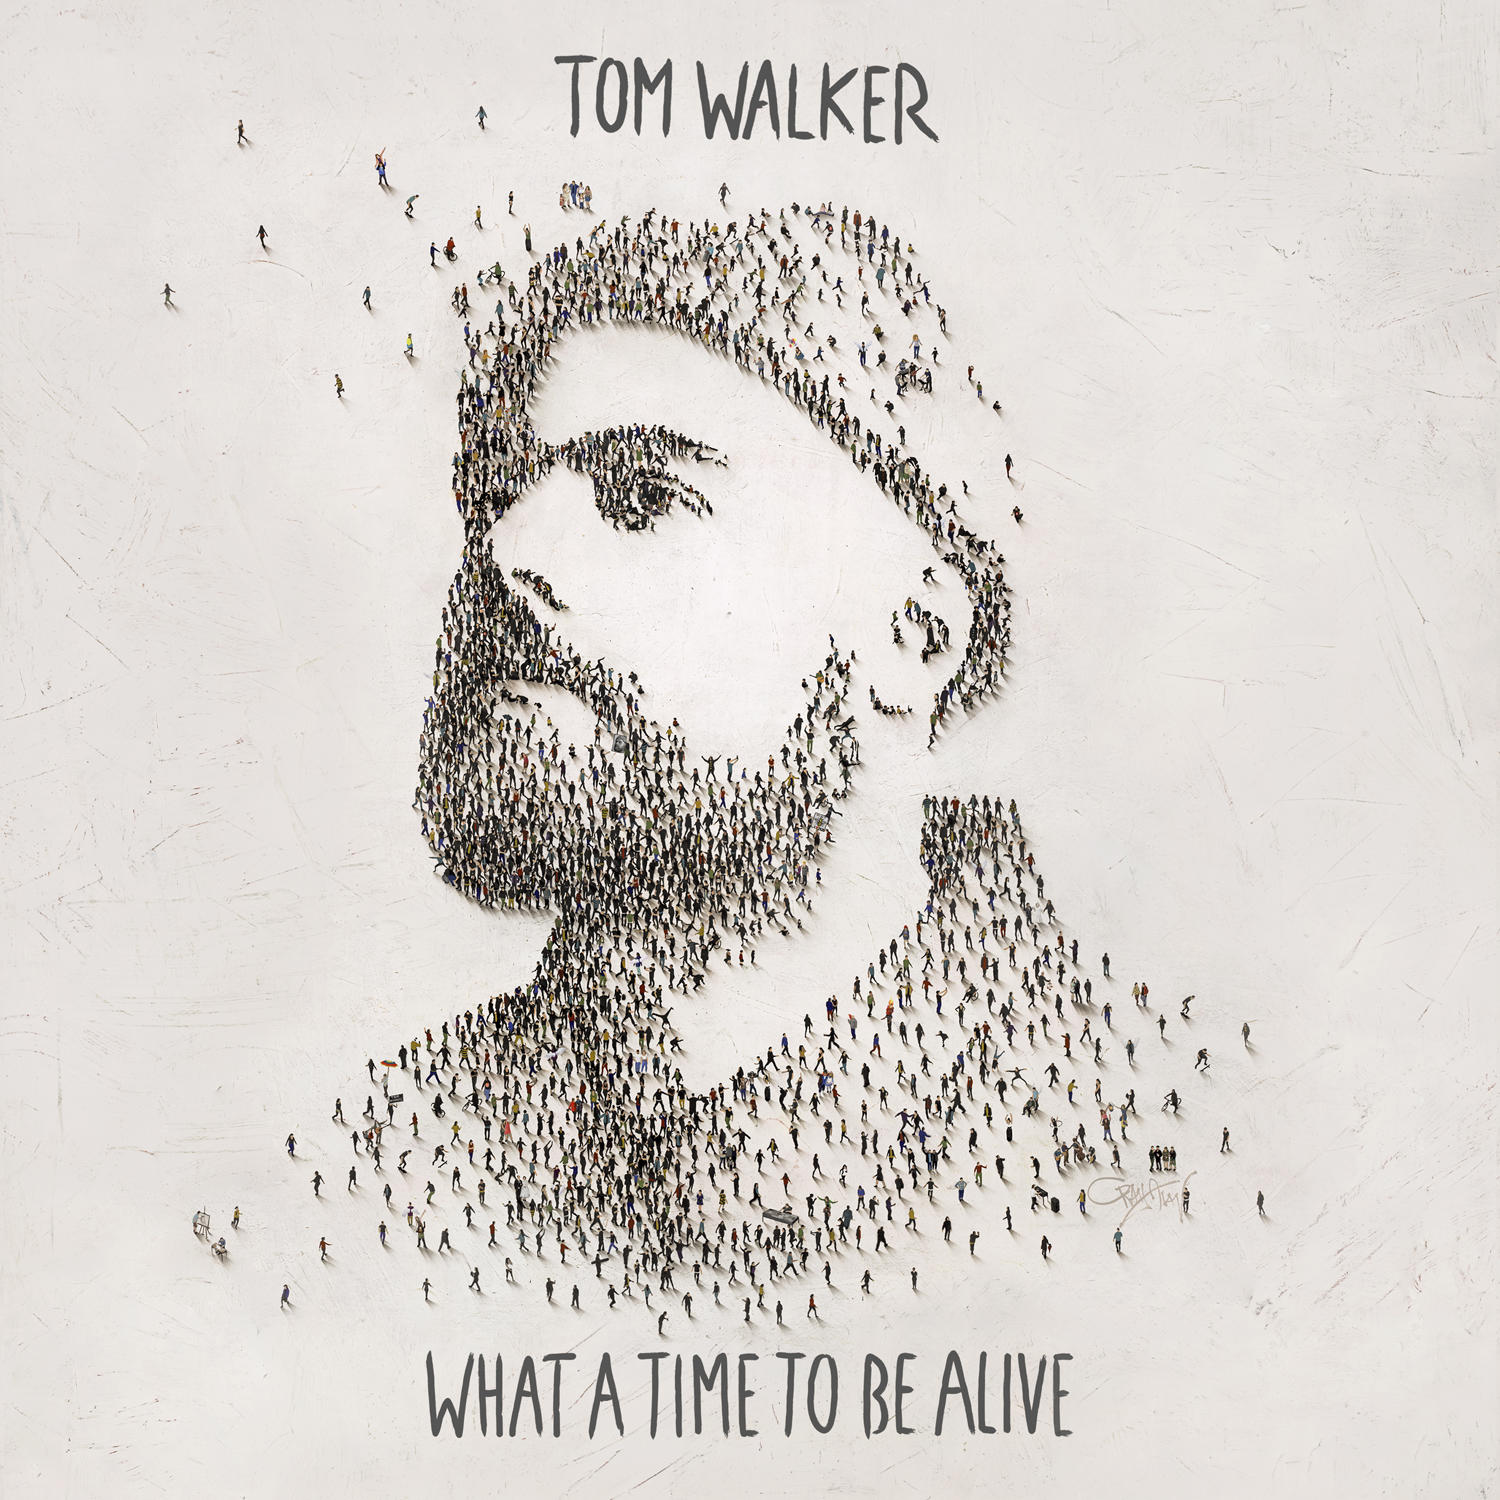 Tom Walker - What a Be Time To (CD) Alive 